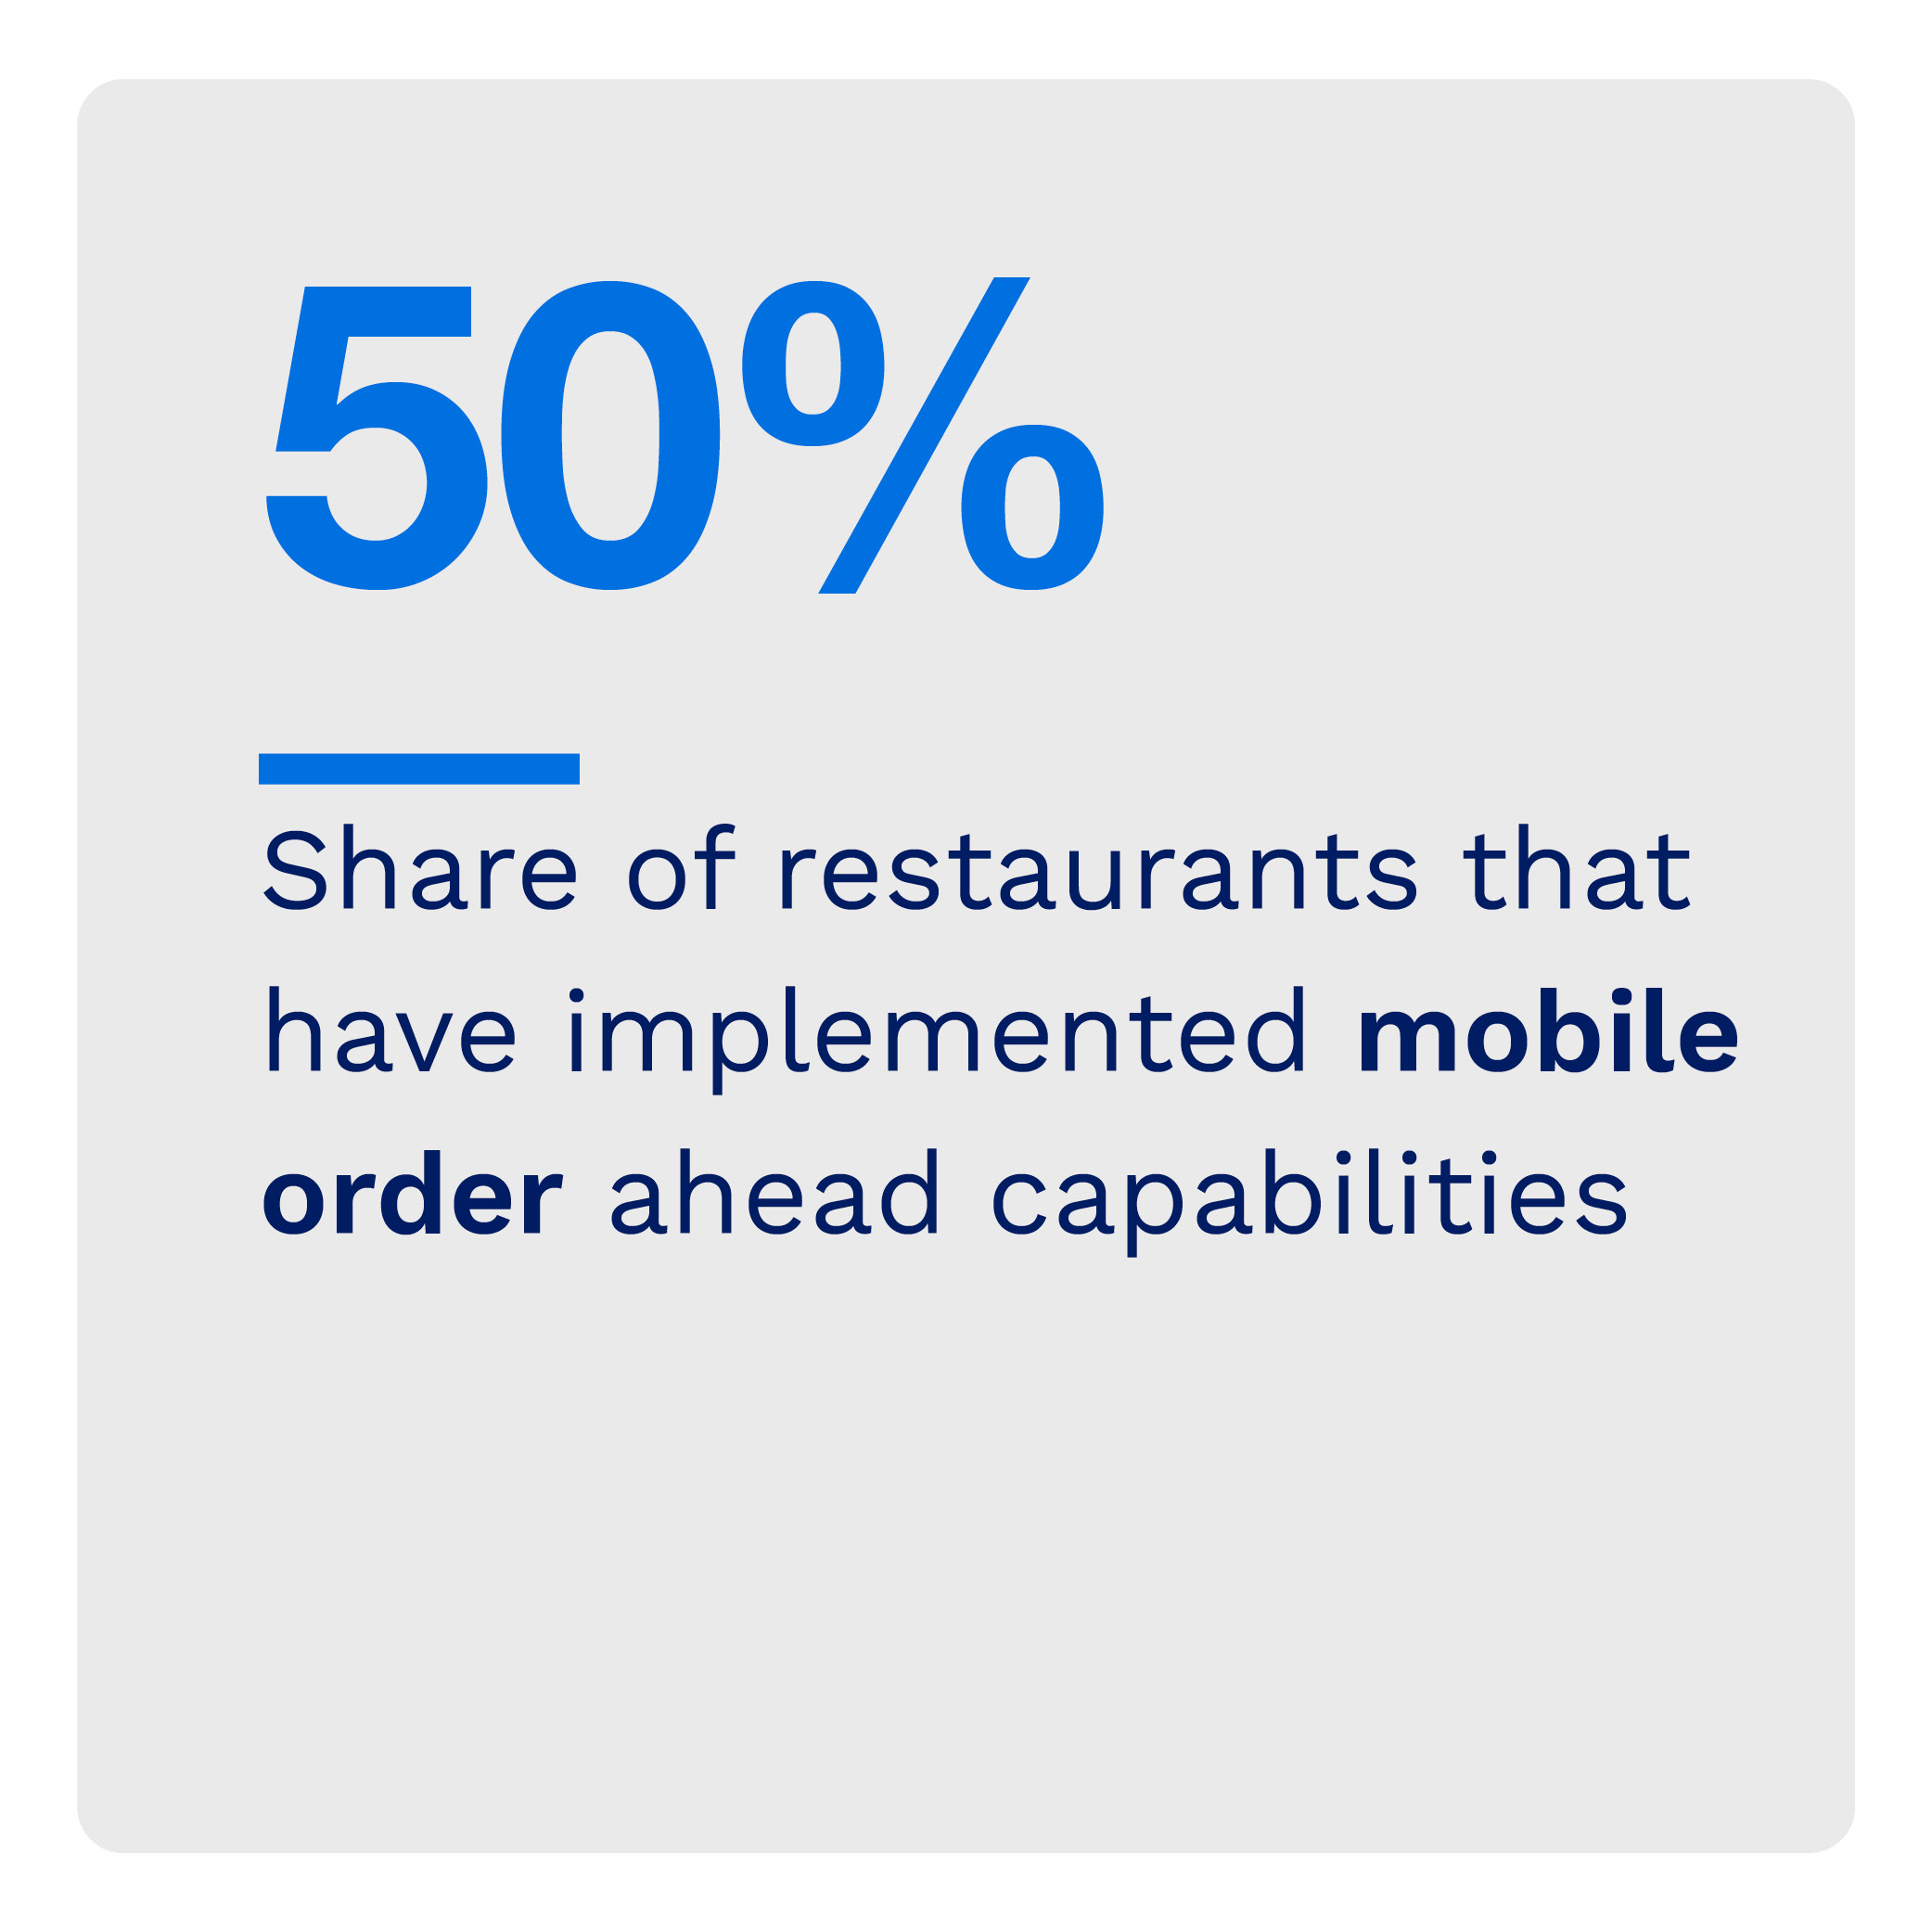 50%: Share of restaurants that have implemented mobile order ahead capabilities